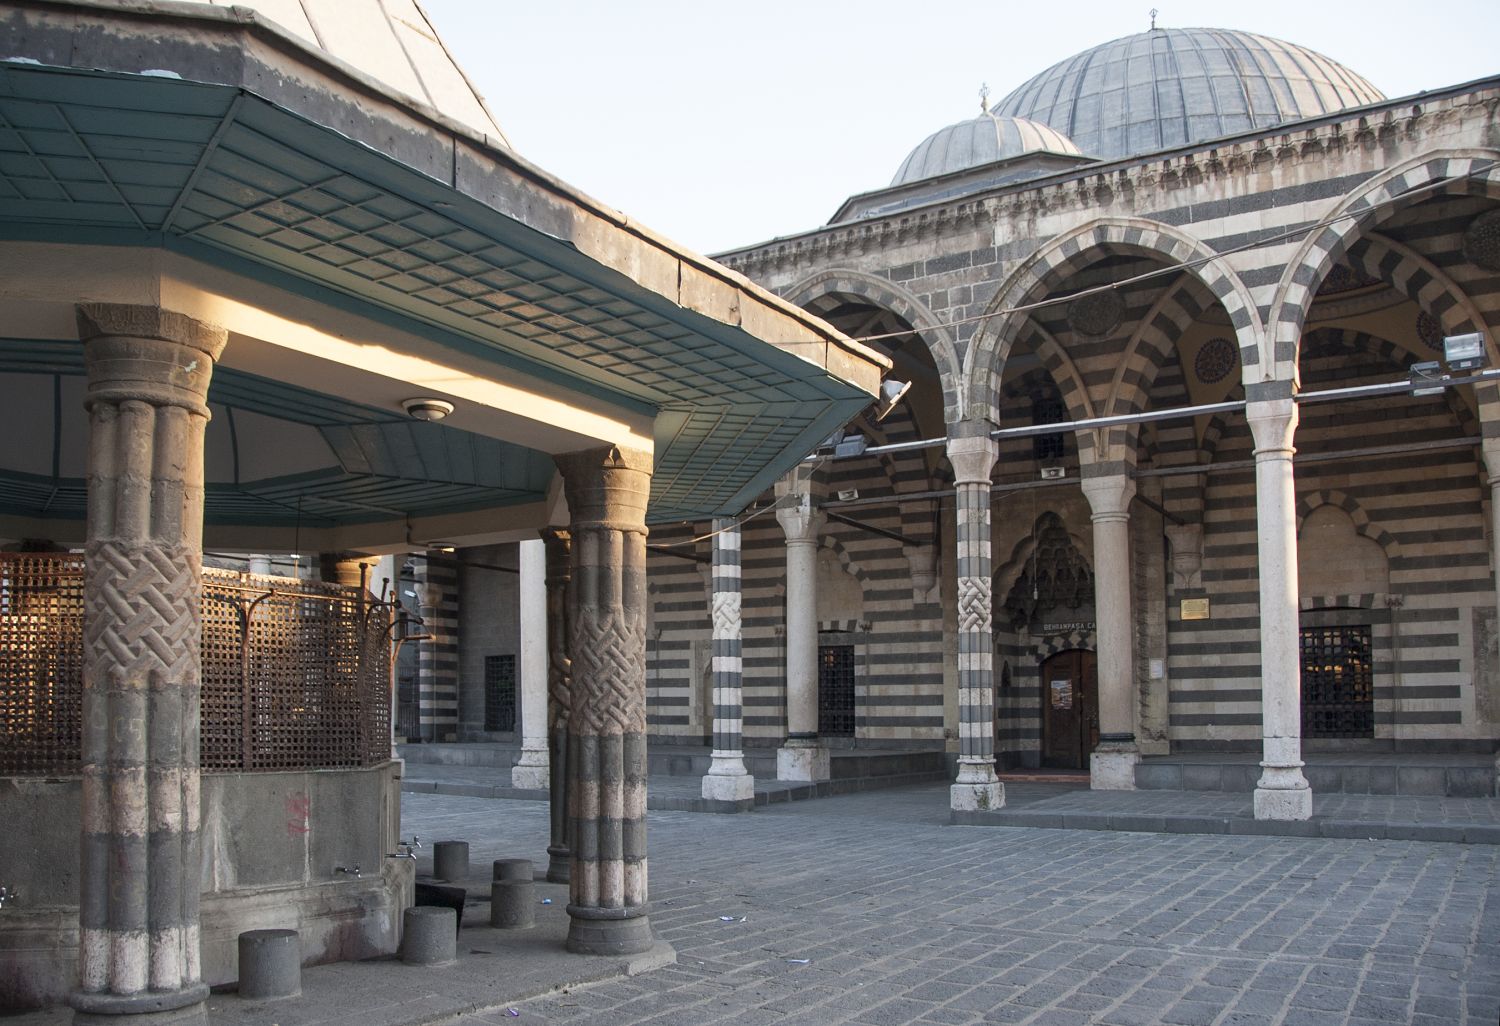 View of the paved square in front of the mosque. The ablutions fountain is visible in the foreground and the portico and north facade of mosque are visible behind.